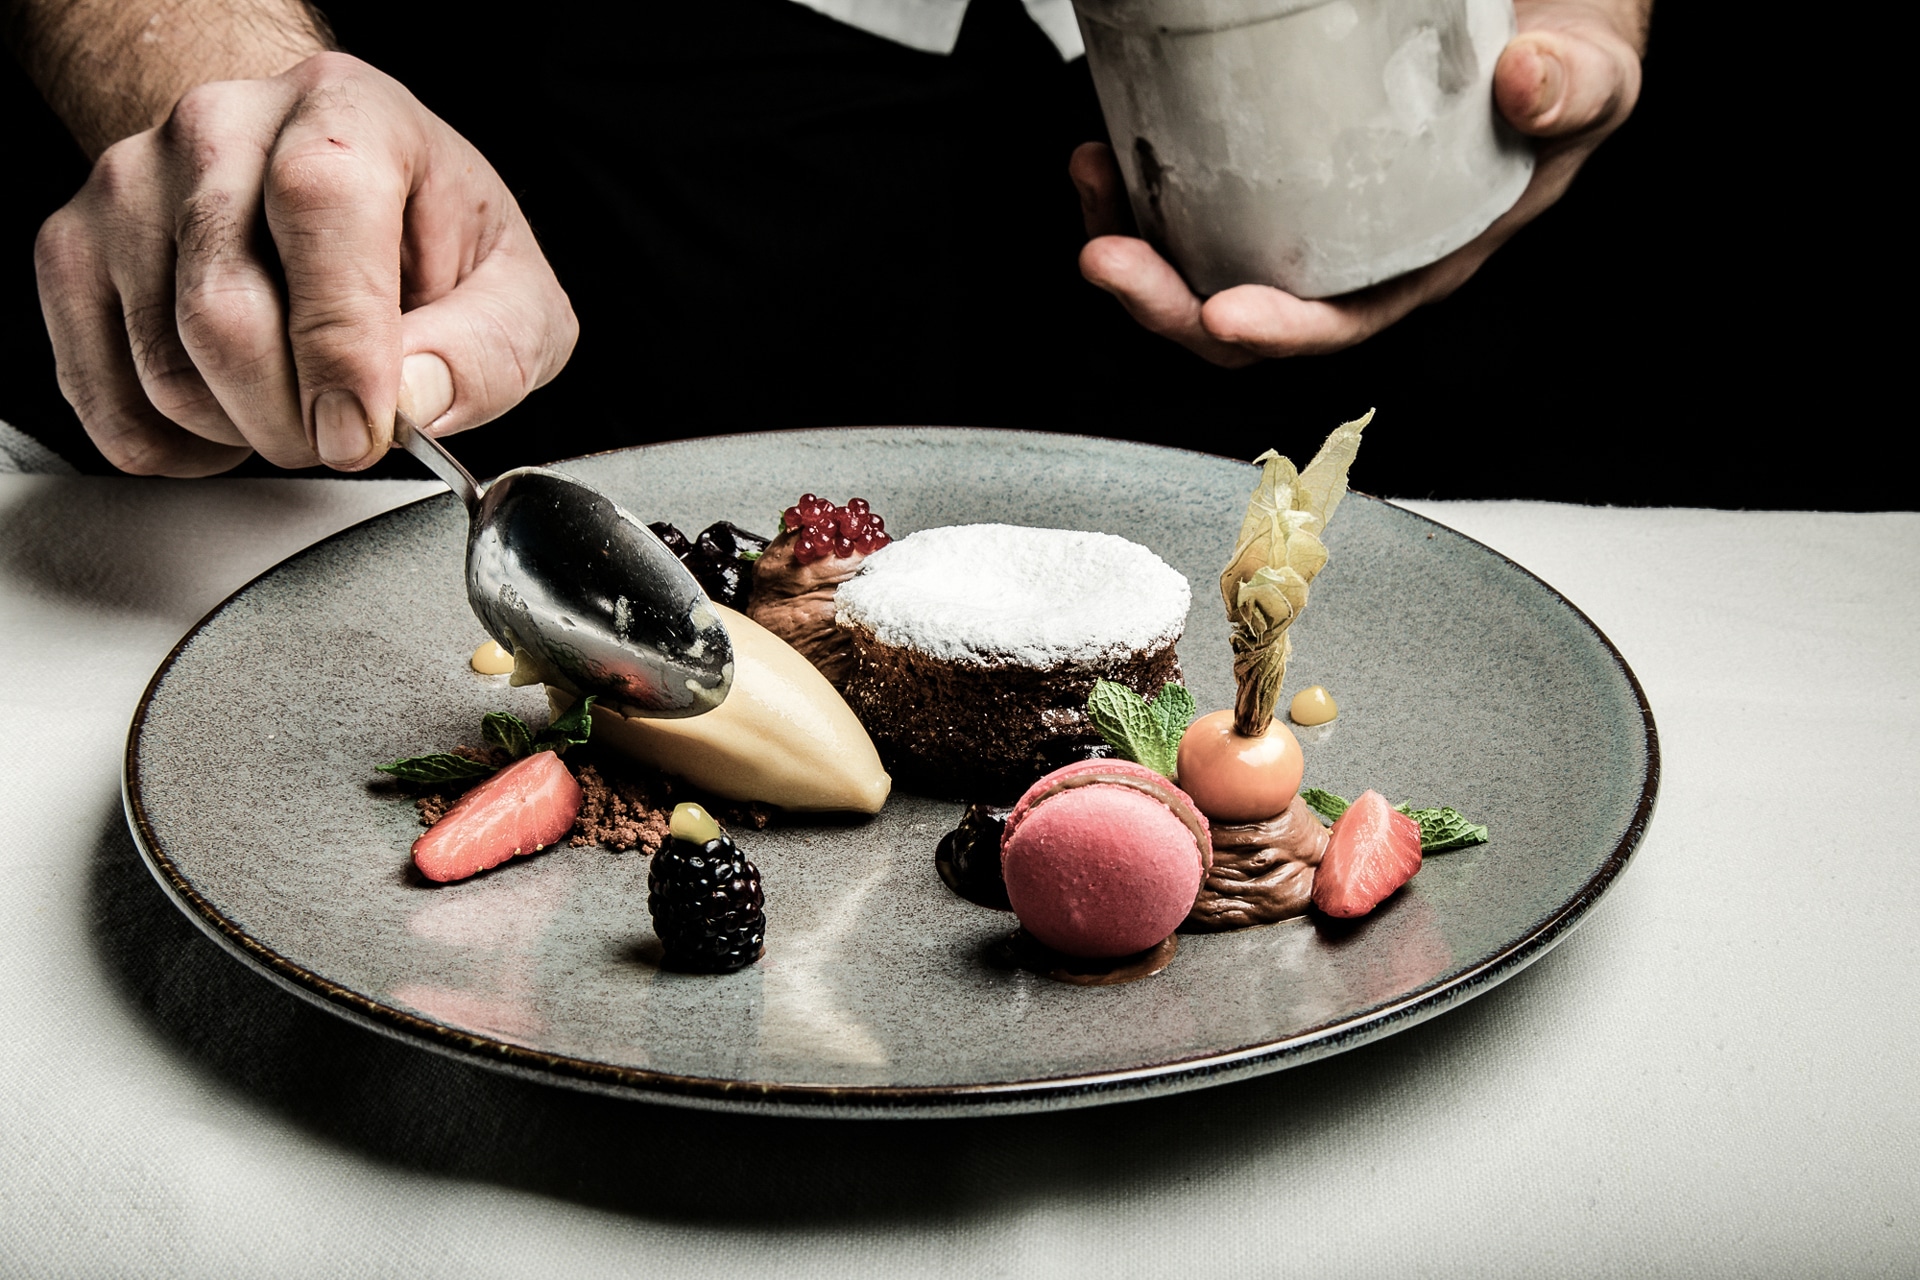 A chef putting the finishing touch on a gourmet dessert platter with delicate chocolate sauce, showcasing an artistic arrangement of a chocolate cake, a quenelle of ice cream, macarons, and fresh berries.